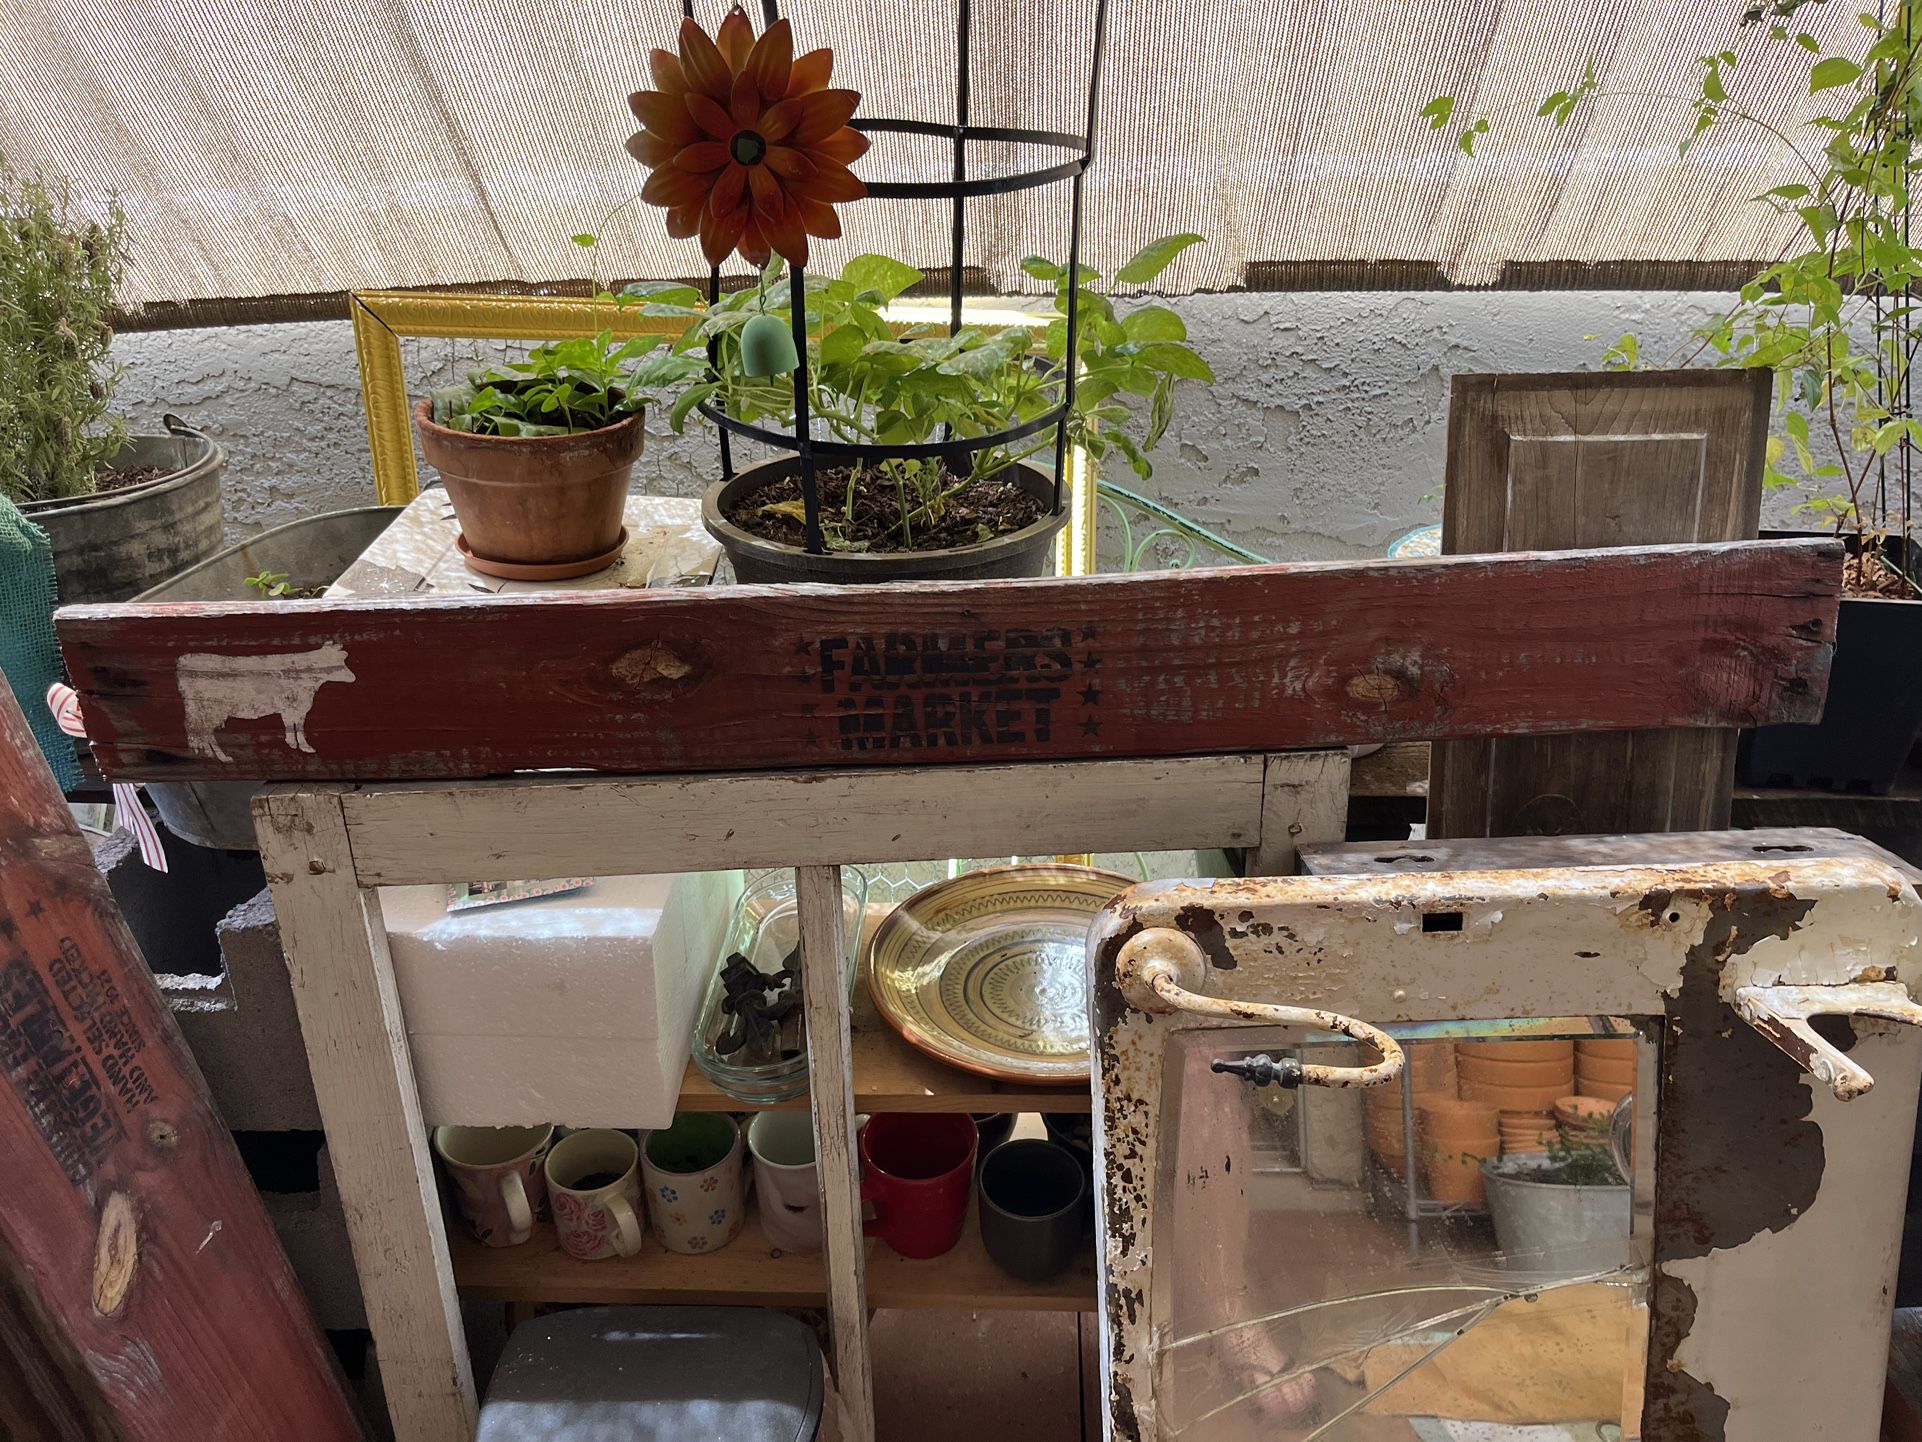 2 Vintage Boards Used As A Storage Box For Vegetables And Farmers Market 